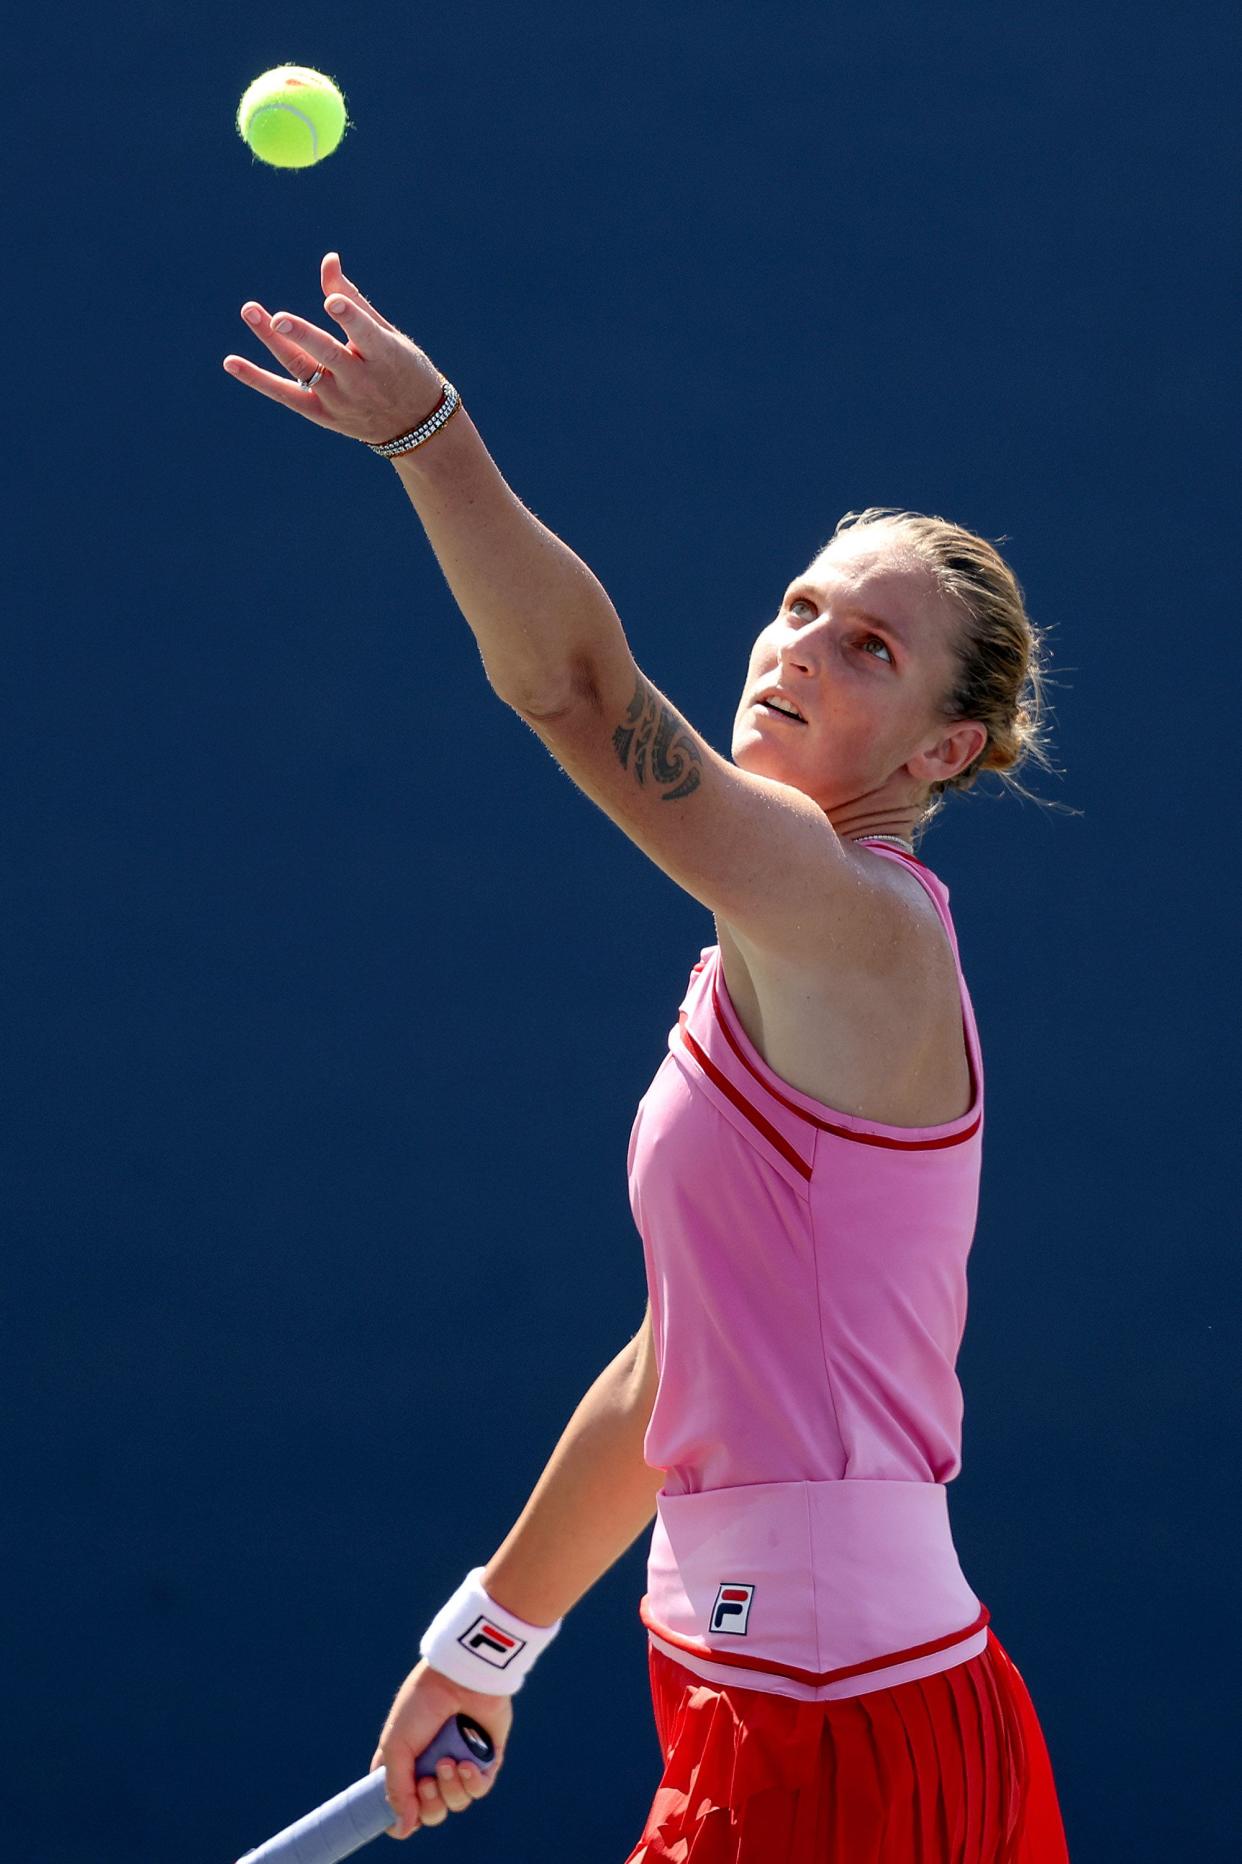 Karolina Pliskova of Czech Republic serves against Magda Linette of Poland in their Women's Singles First Round match on Day Two of the 2022 U.S. Open at USTA Billie Jean King National Tennis Center on Aug. 30, 2022, in Flushing, Queens.